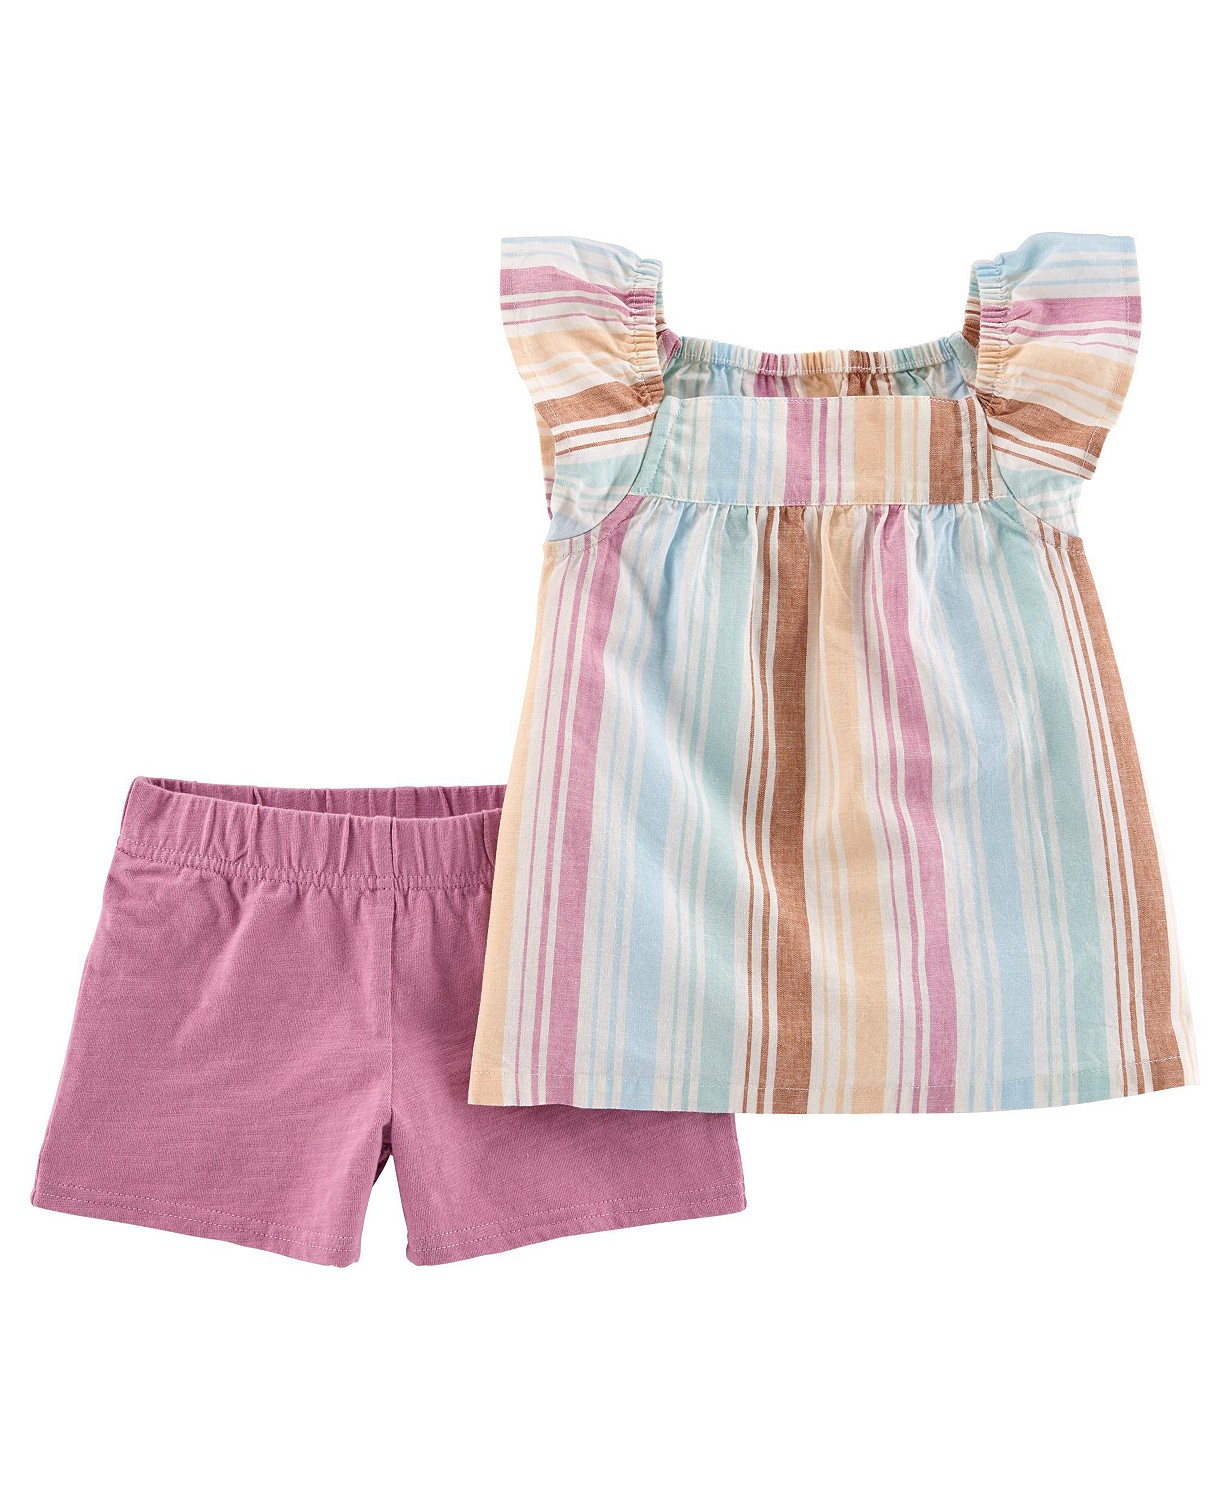 Toddler Girls 2-Piece Striped Top and Shorts Set